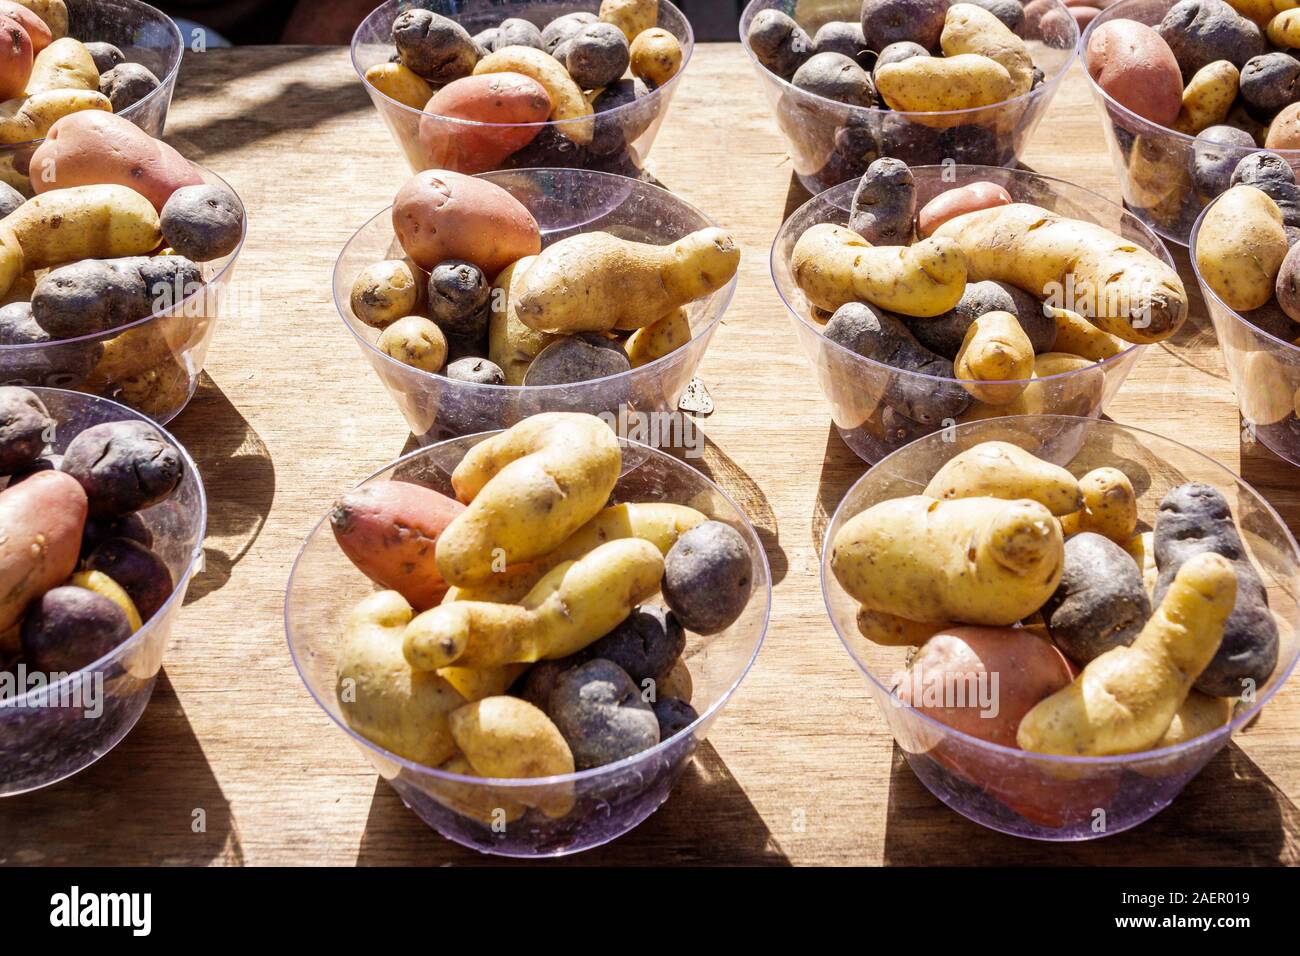 Orlando Winter Park Florida,Downtown,historic district,Farmers' Market,weekly Saturday outdoor,vendor,produce stand,fingerling potatoes,red,purple,pla Stock Photo